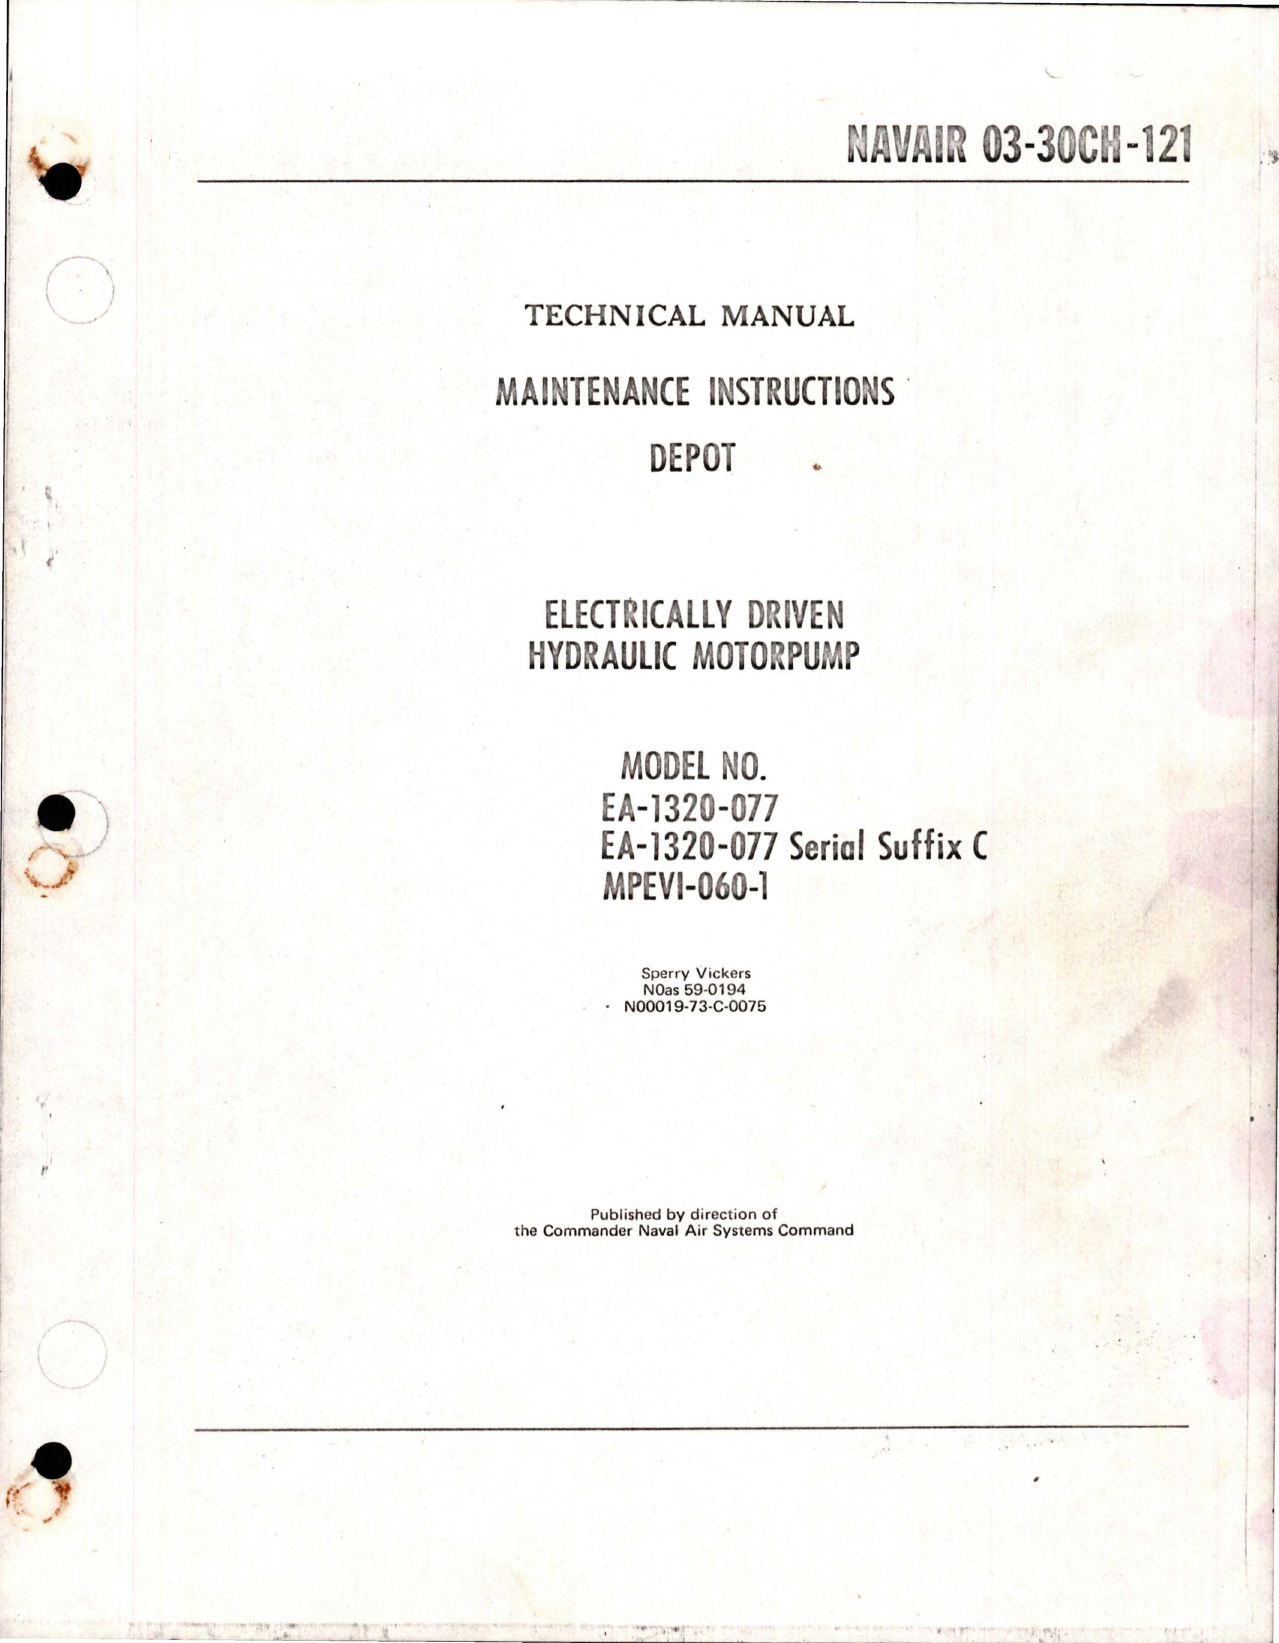 Sample page 1 from AirCorps Library document: Maintenance Instructions for Electrically Driven Hydraulic Motorpump - Models EA-1320-077, EA-1320-077C, MPEVI-060-1